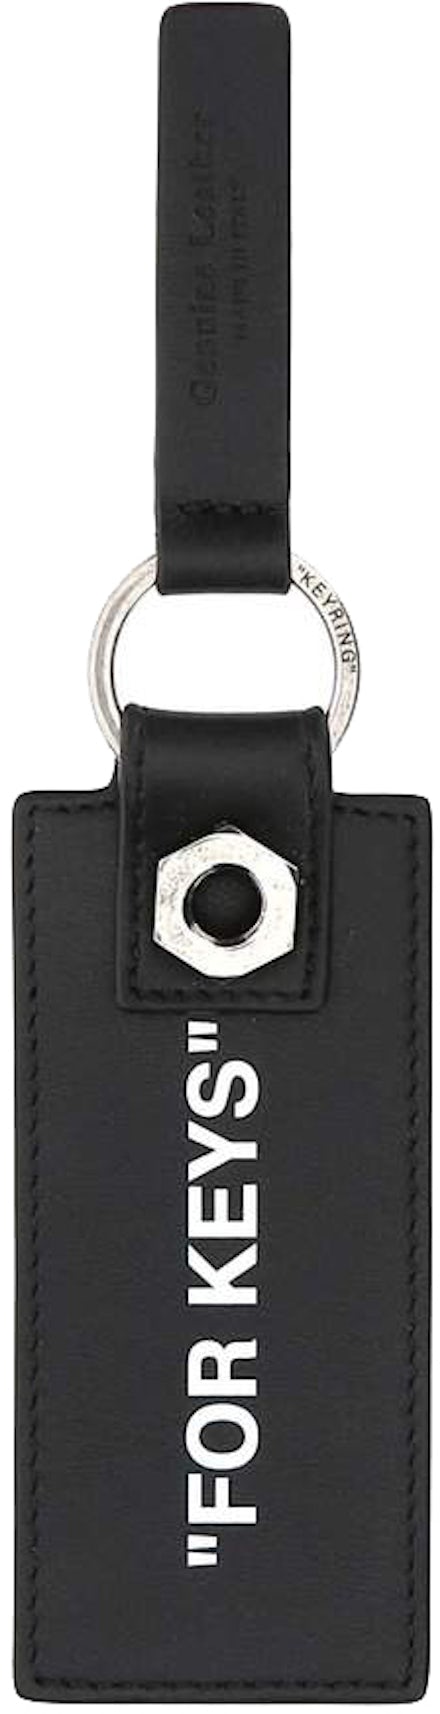 Off-White c/o Virgil Abloh Quote Leather Key Chain - Black! Fast ship!